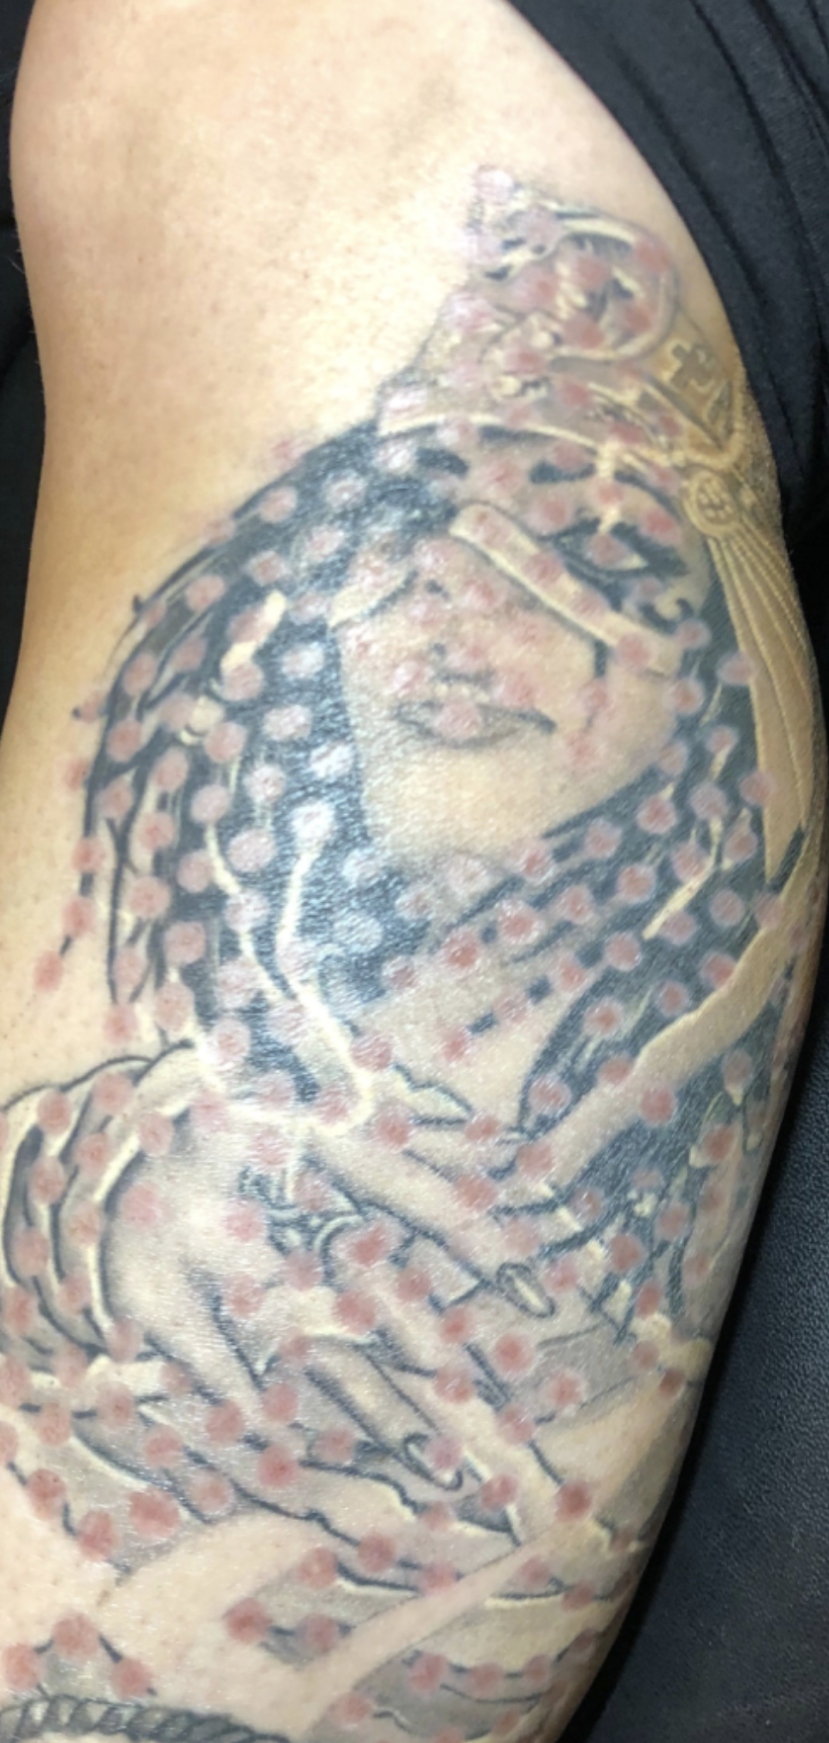 back of arm tattoo removal